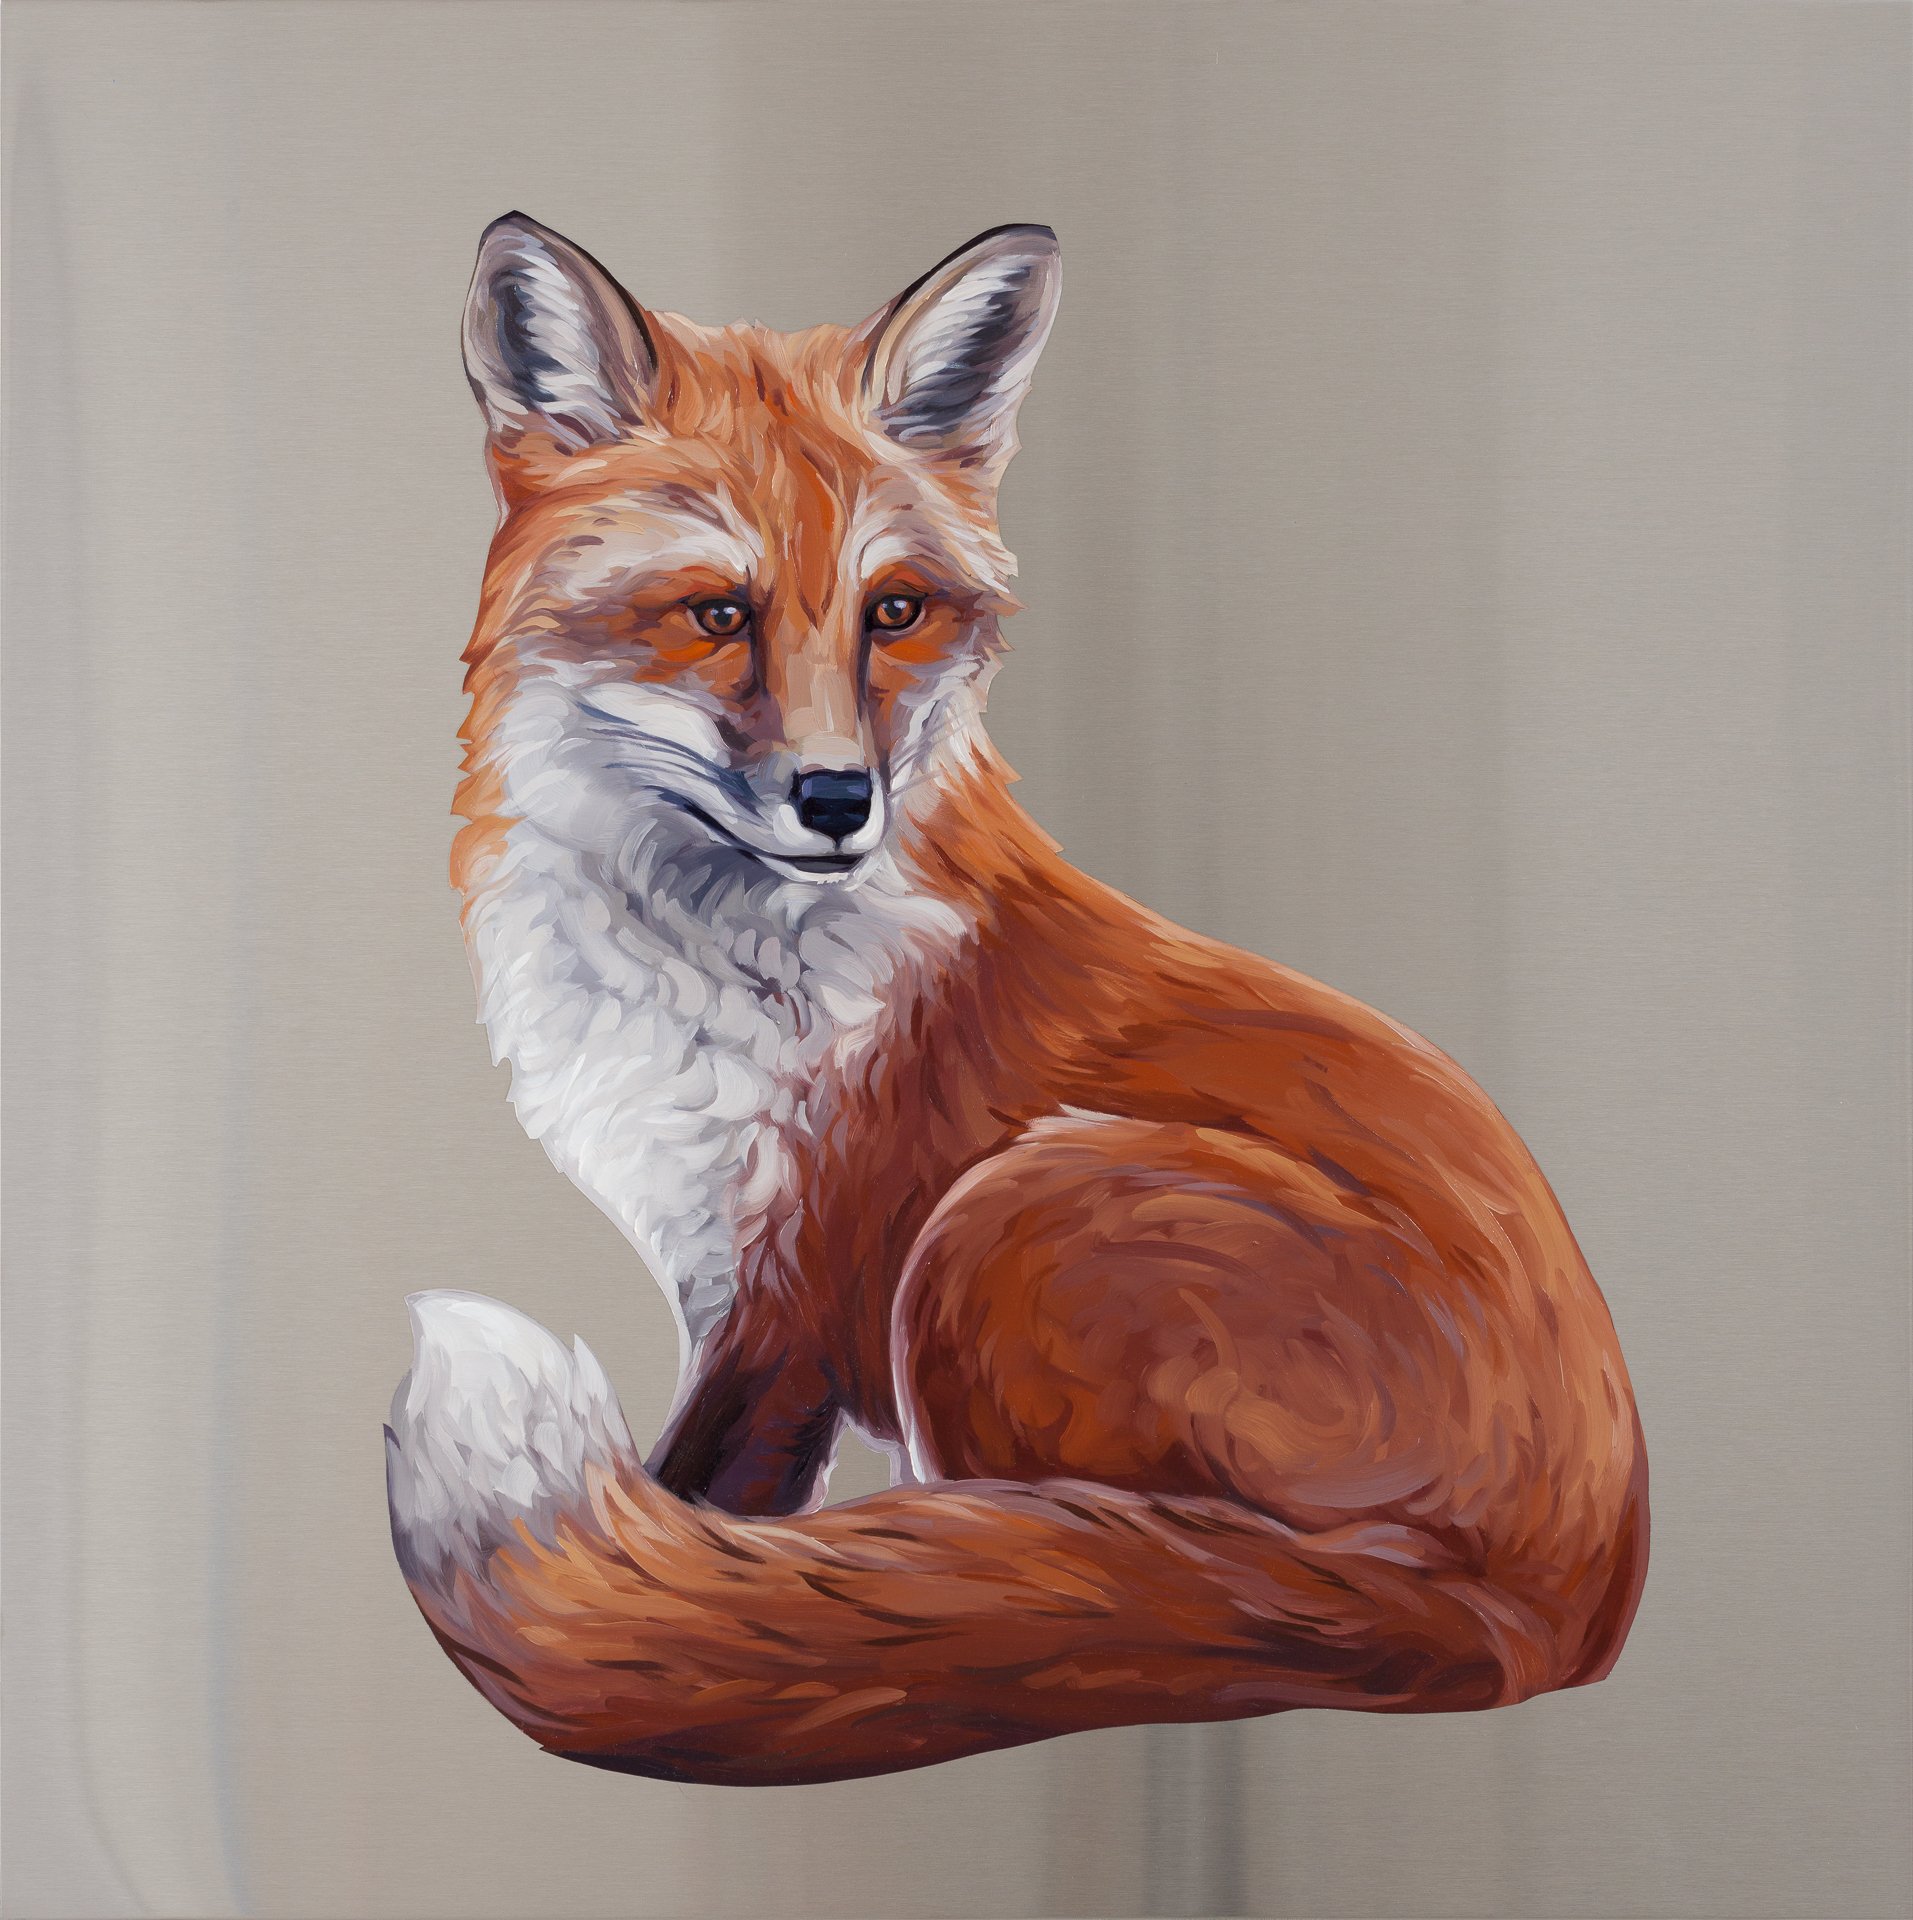  Red Fox. Oil on stainless steel, 24in x 24in 